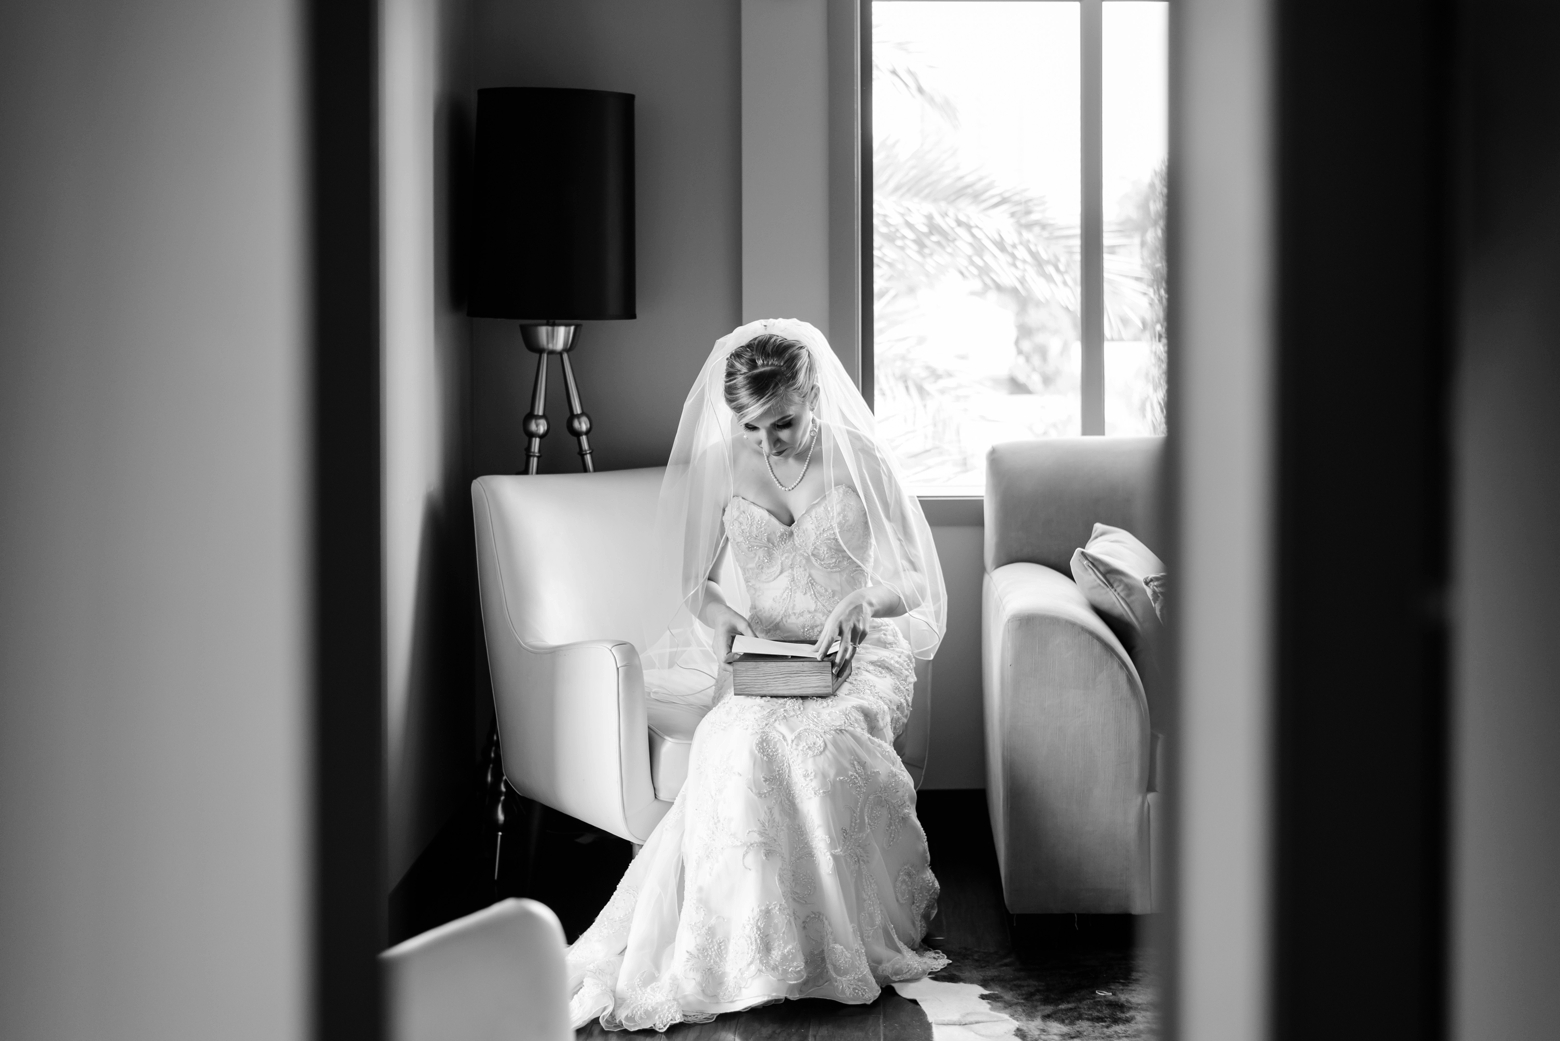 The Bride sits alone looking at her gift from the Groom